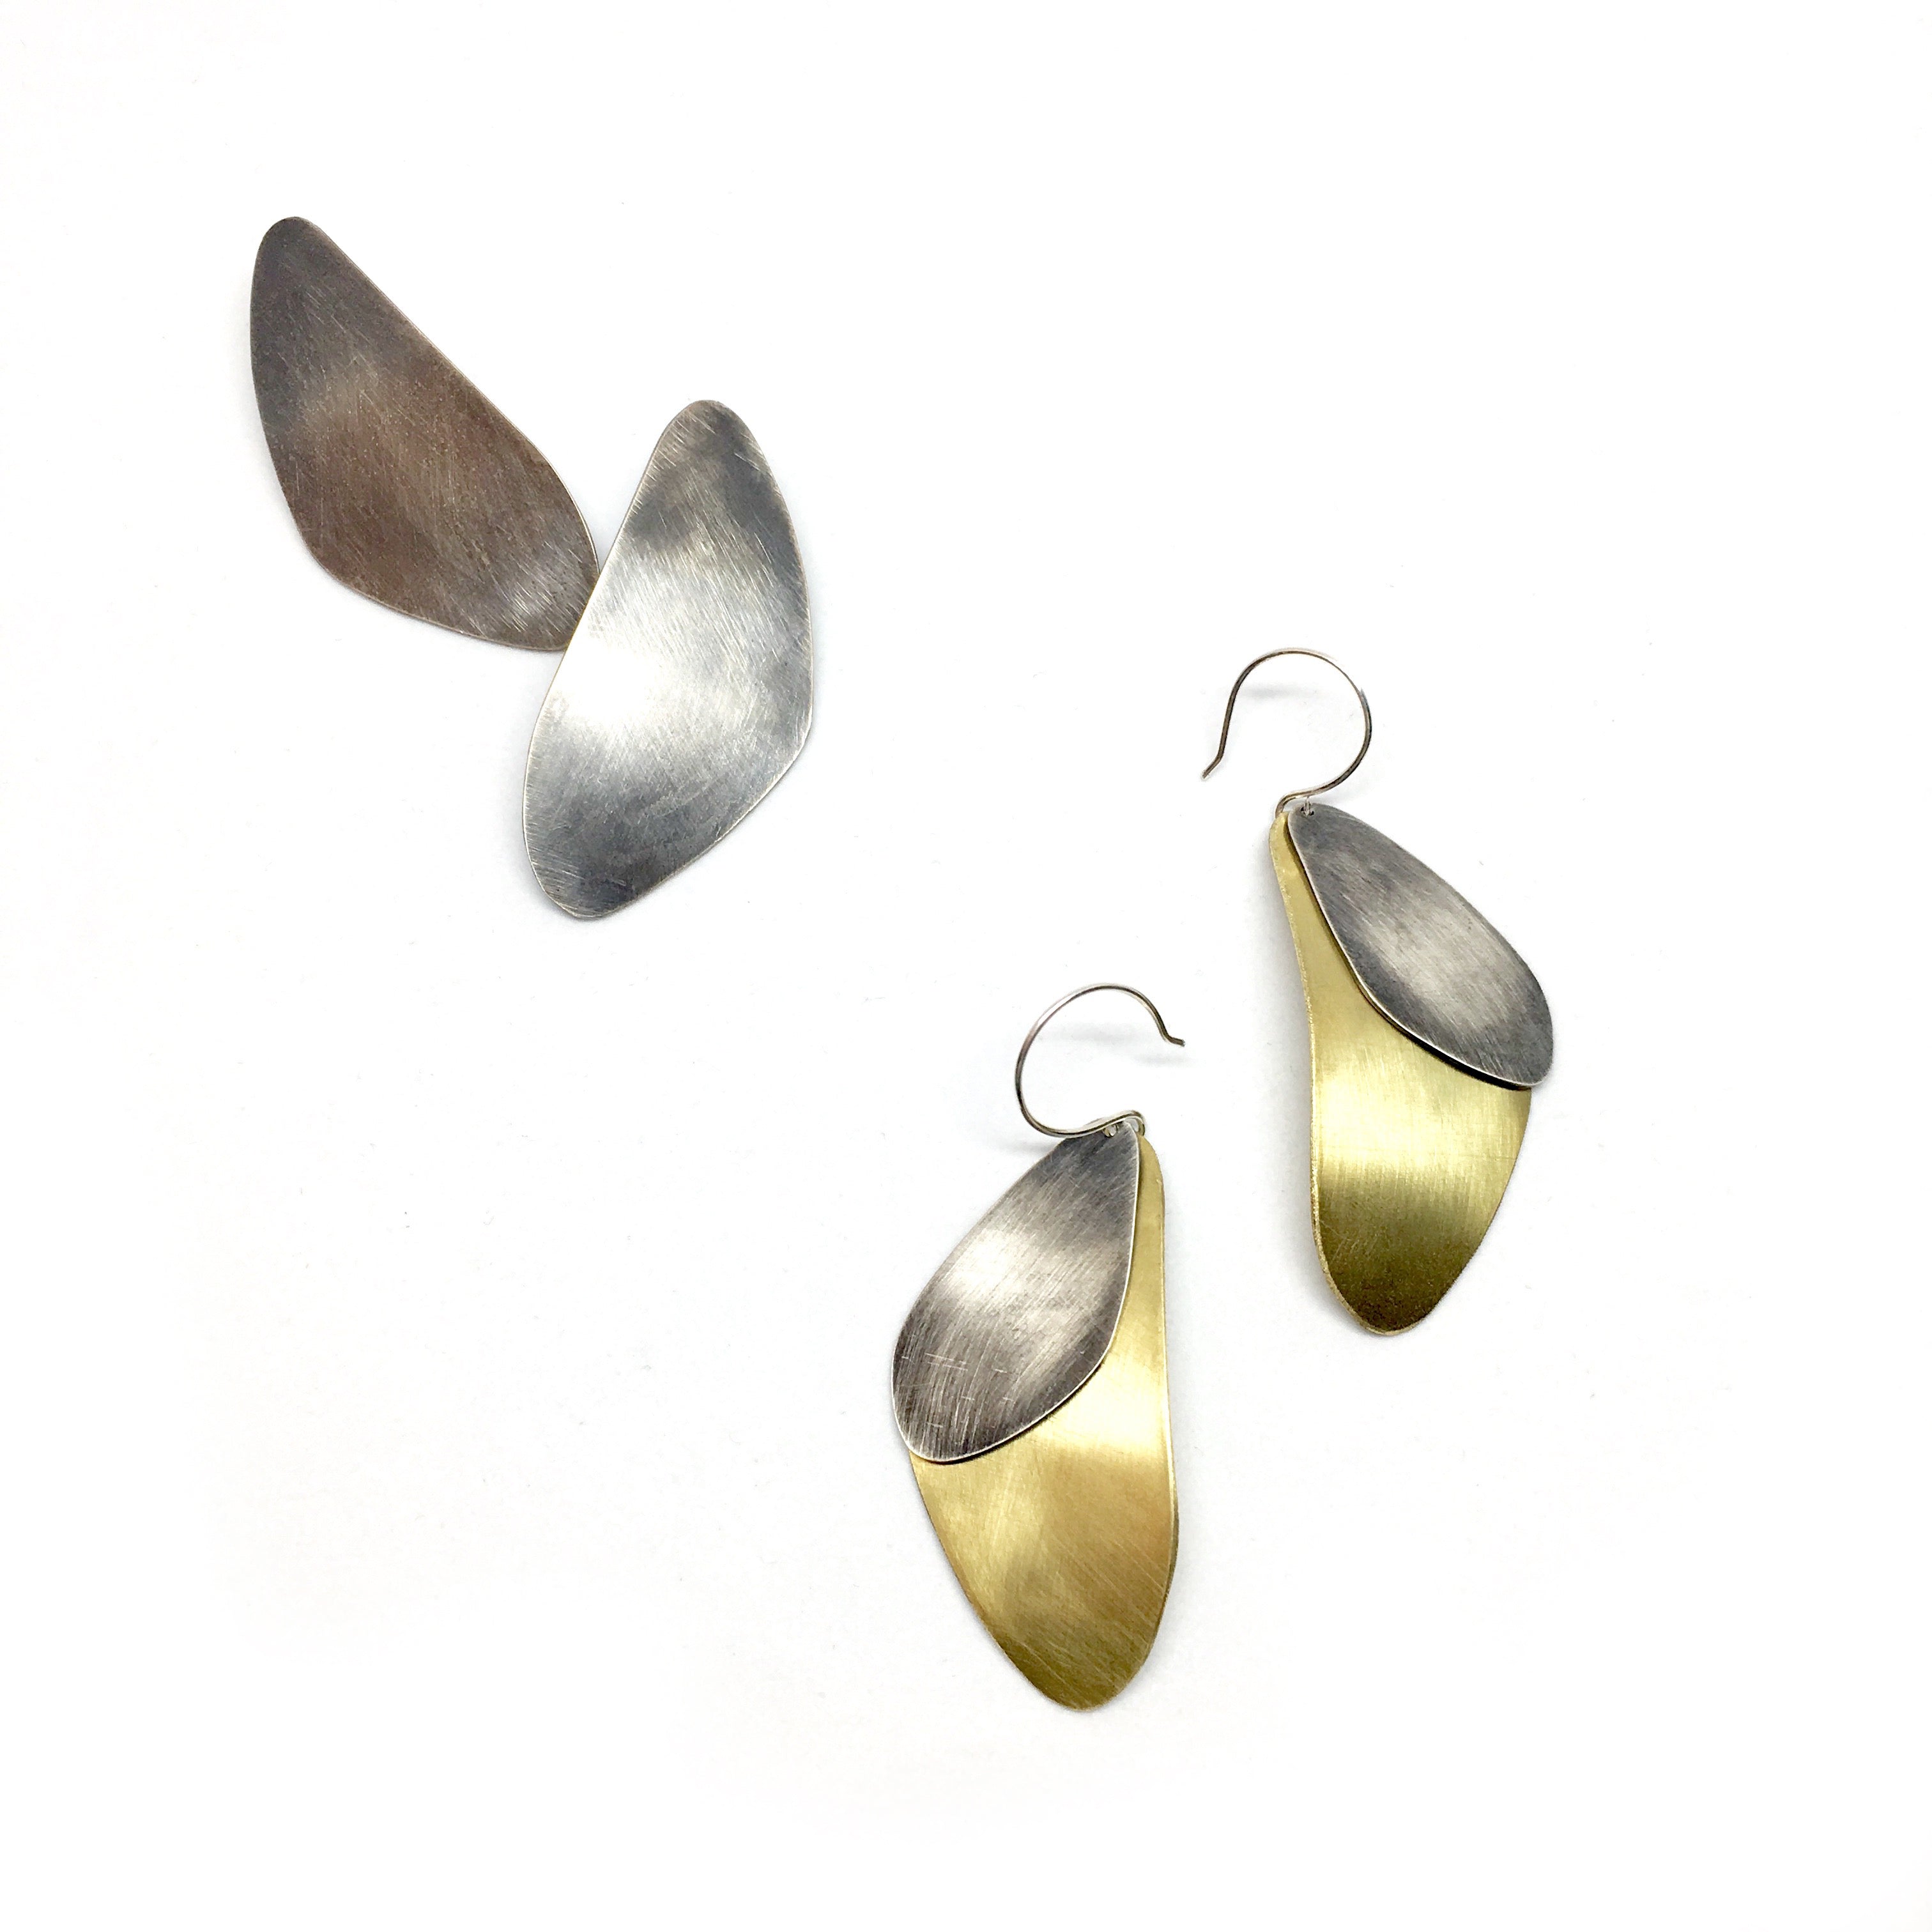 Abstract Earrings -LG Mussels